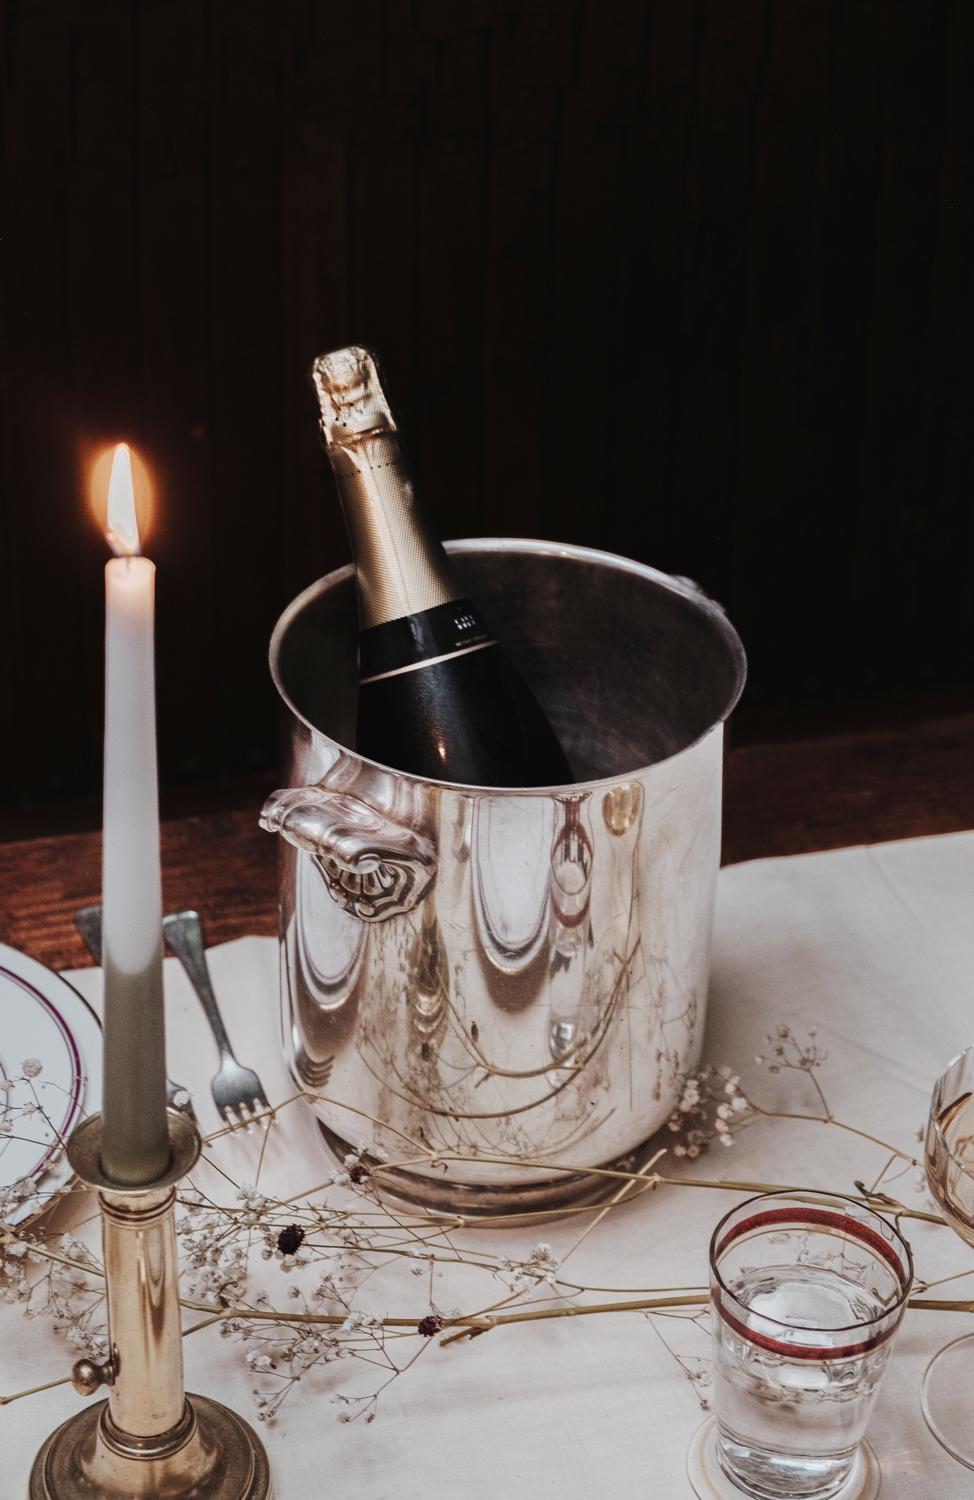 Vintage Christofle France silver plated wine or champagne cooler or ice bucket.

A stunning vintage champagne bucket or cooler in silver plate, a hefty quality piece by the famous French Orfevrerie Christofle of Paris. This design is called Ormesson